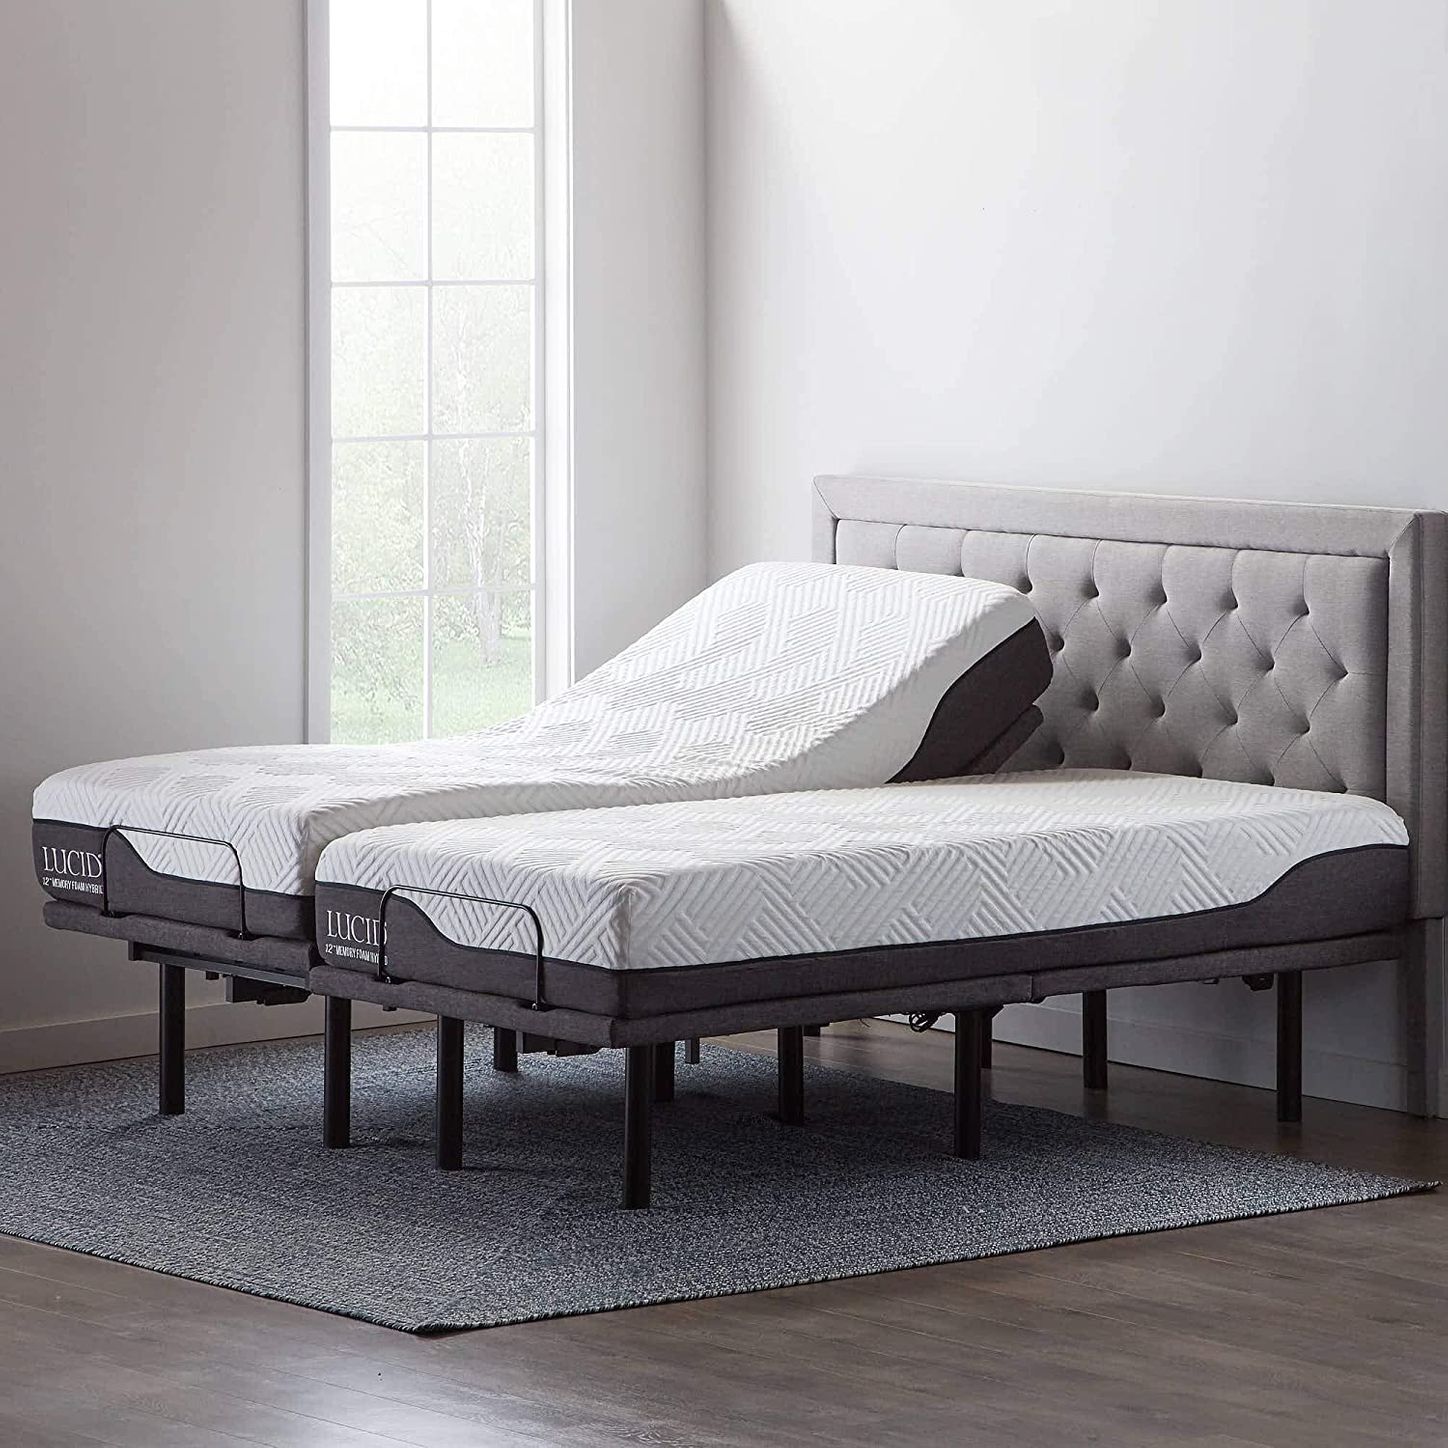 10 Best Adjustable Bed Bases 2022 The, What Is A Split Queen Adjustable Bed